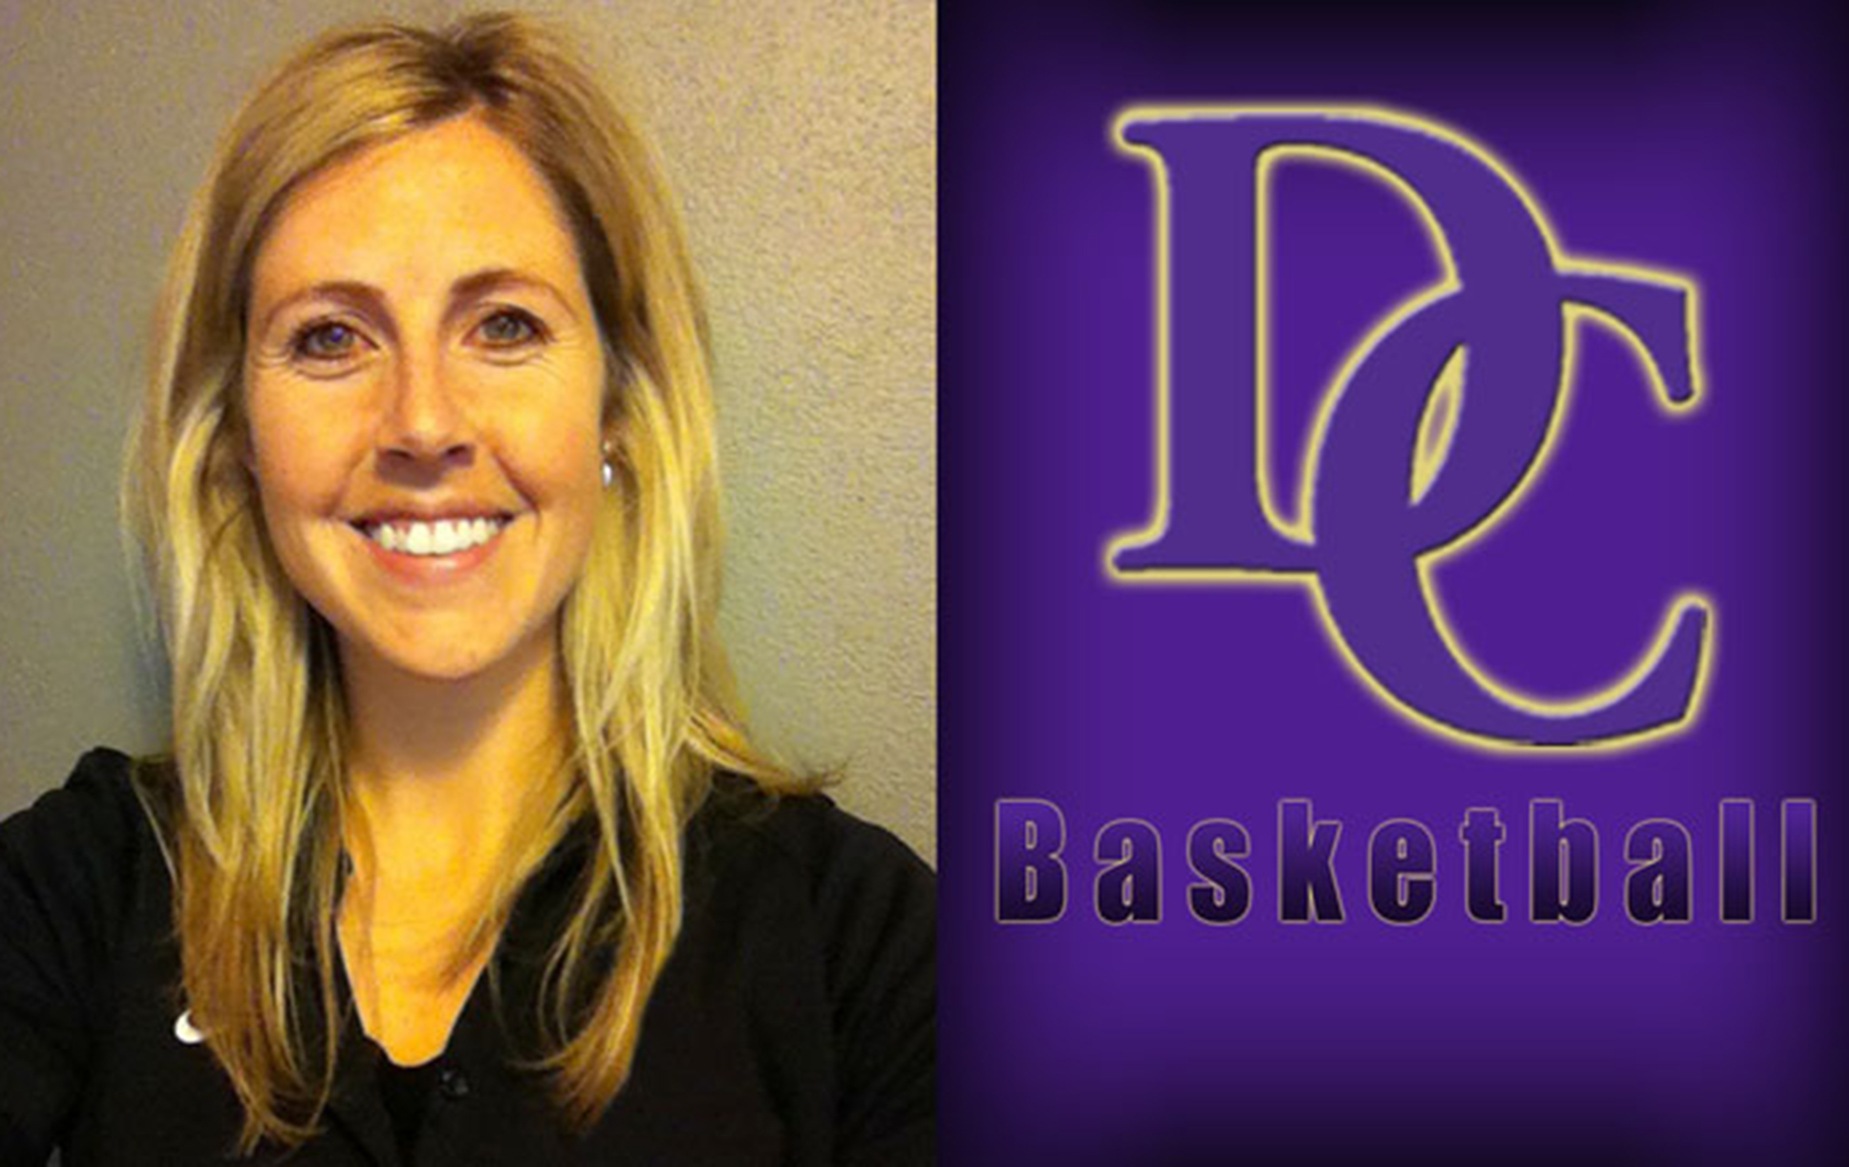 DC Set to Move Forward with Cox as Women's Basketball Coach